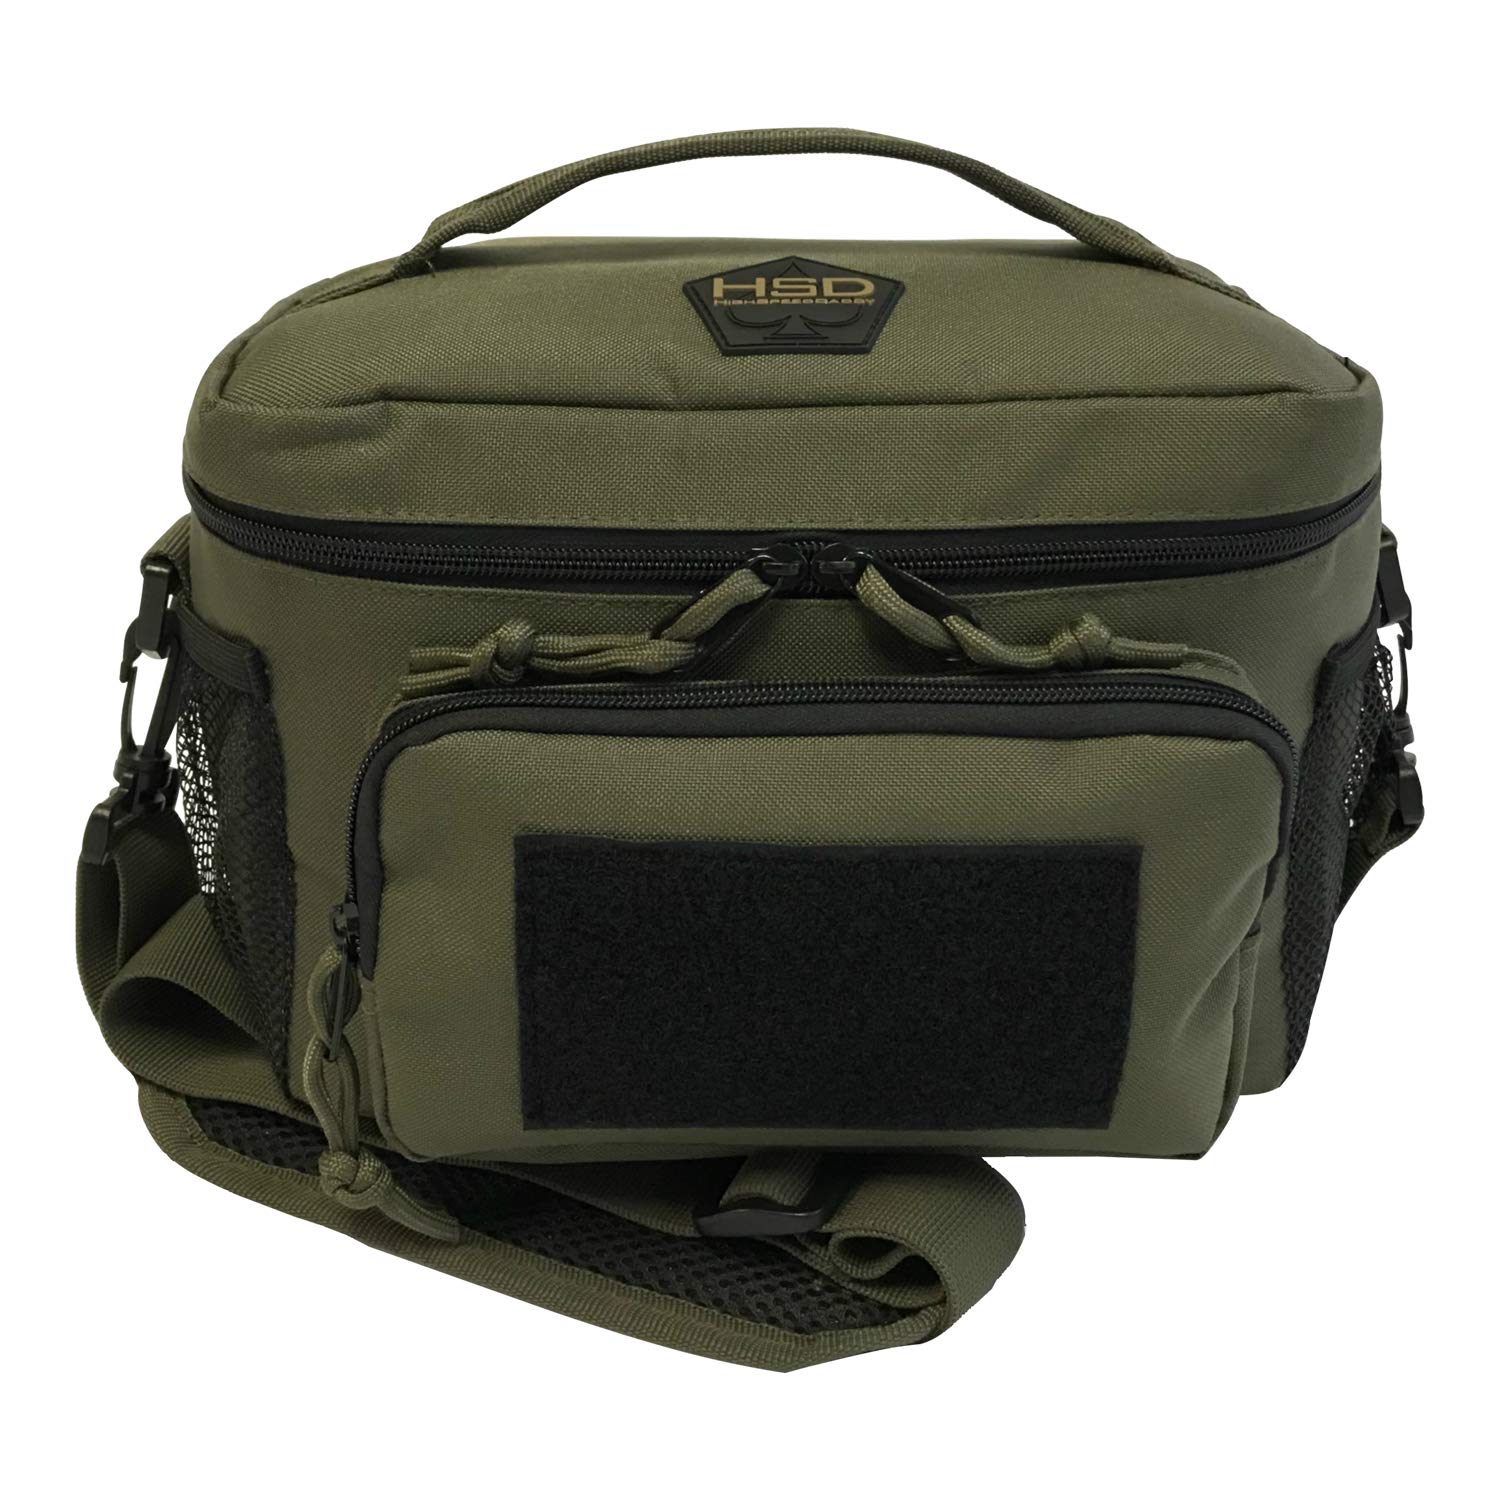 HighSpeedDaddy Tactical Insulated Lunch Box